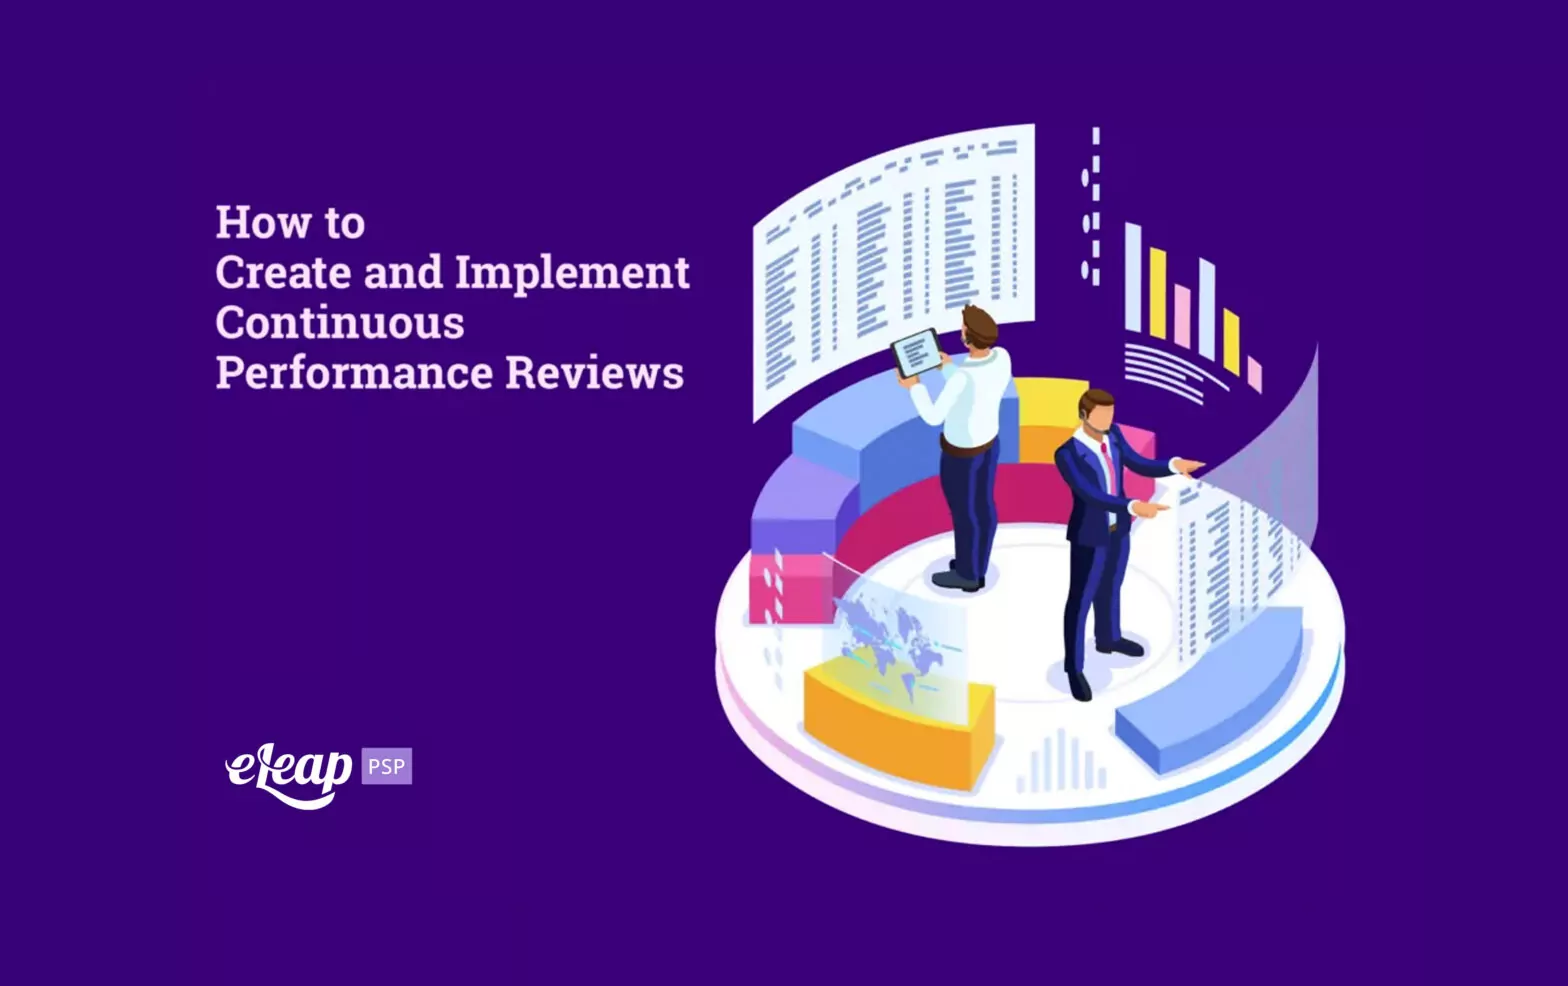 How to Create and Implement Continuous Performance Reviews